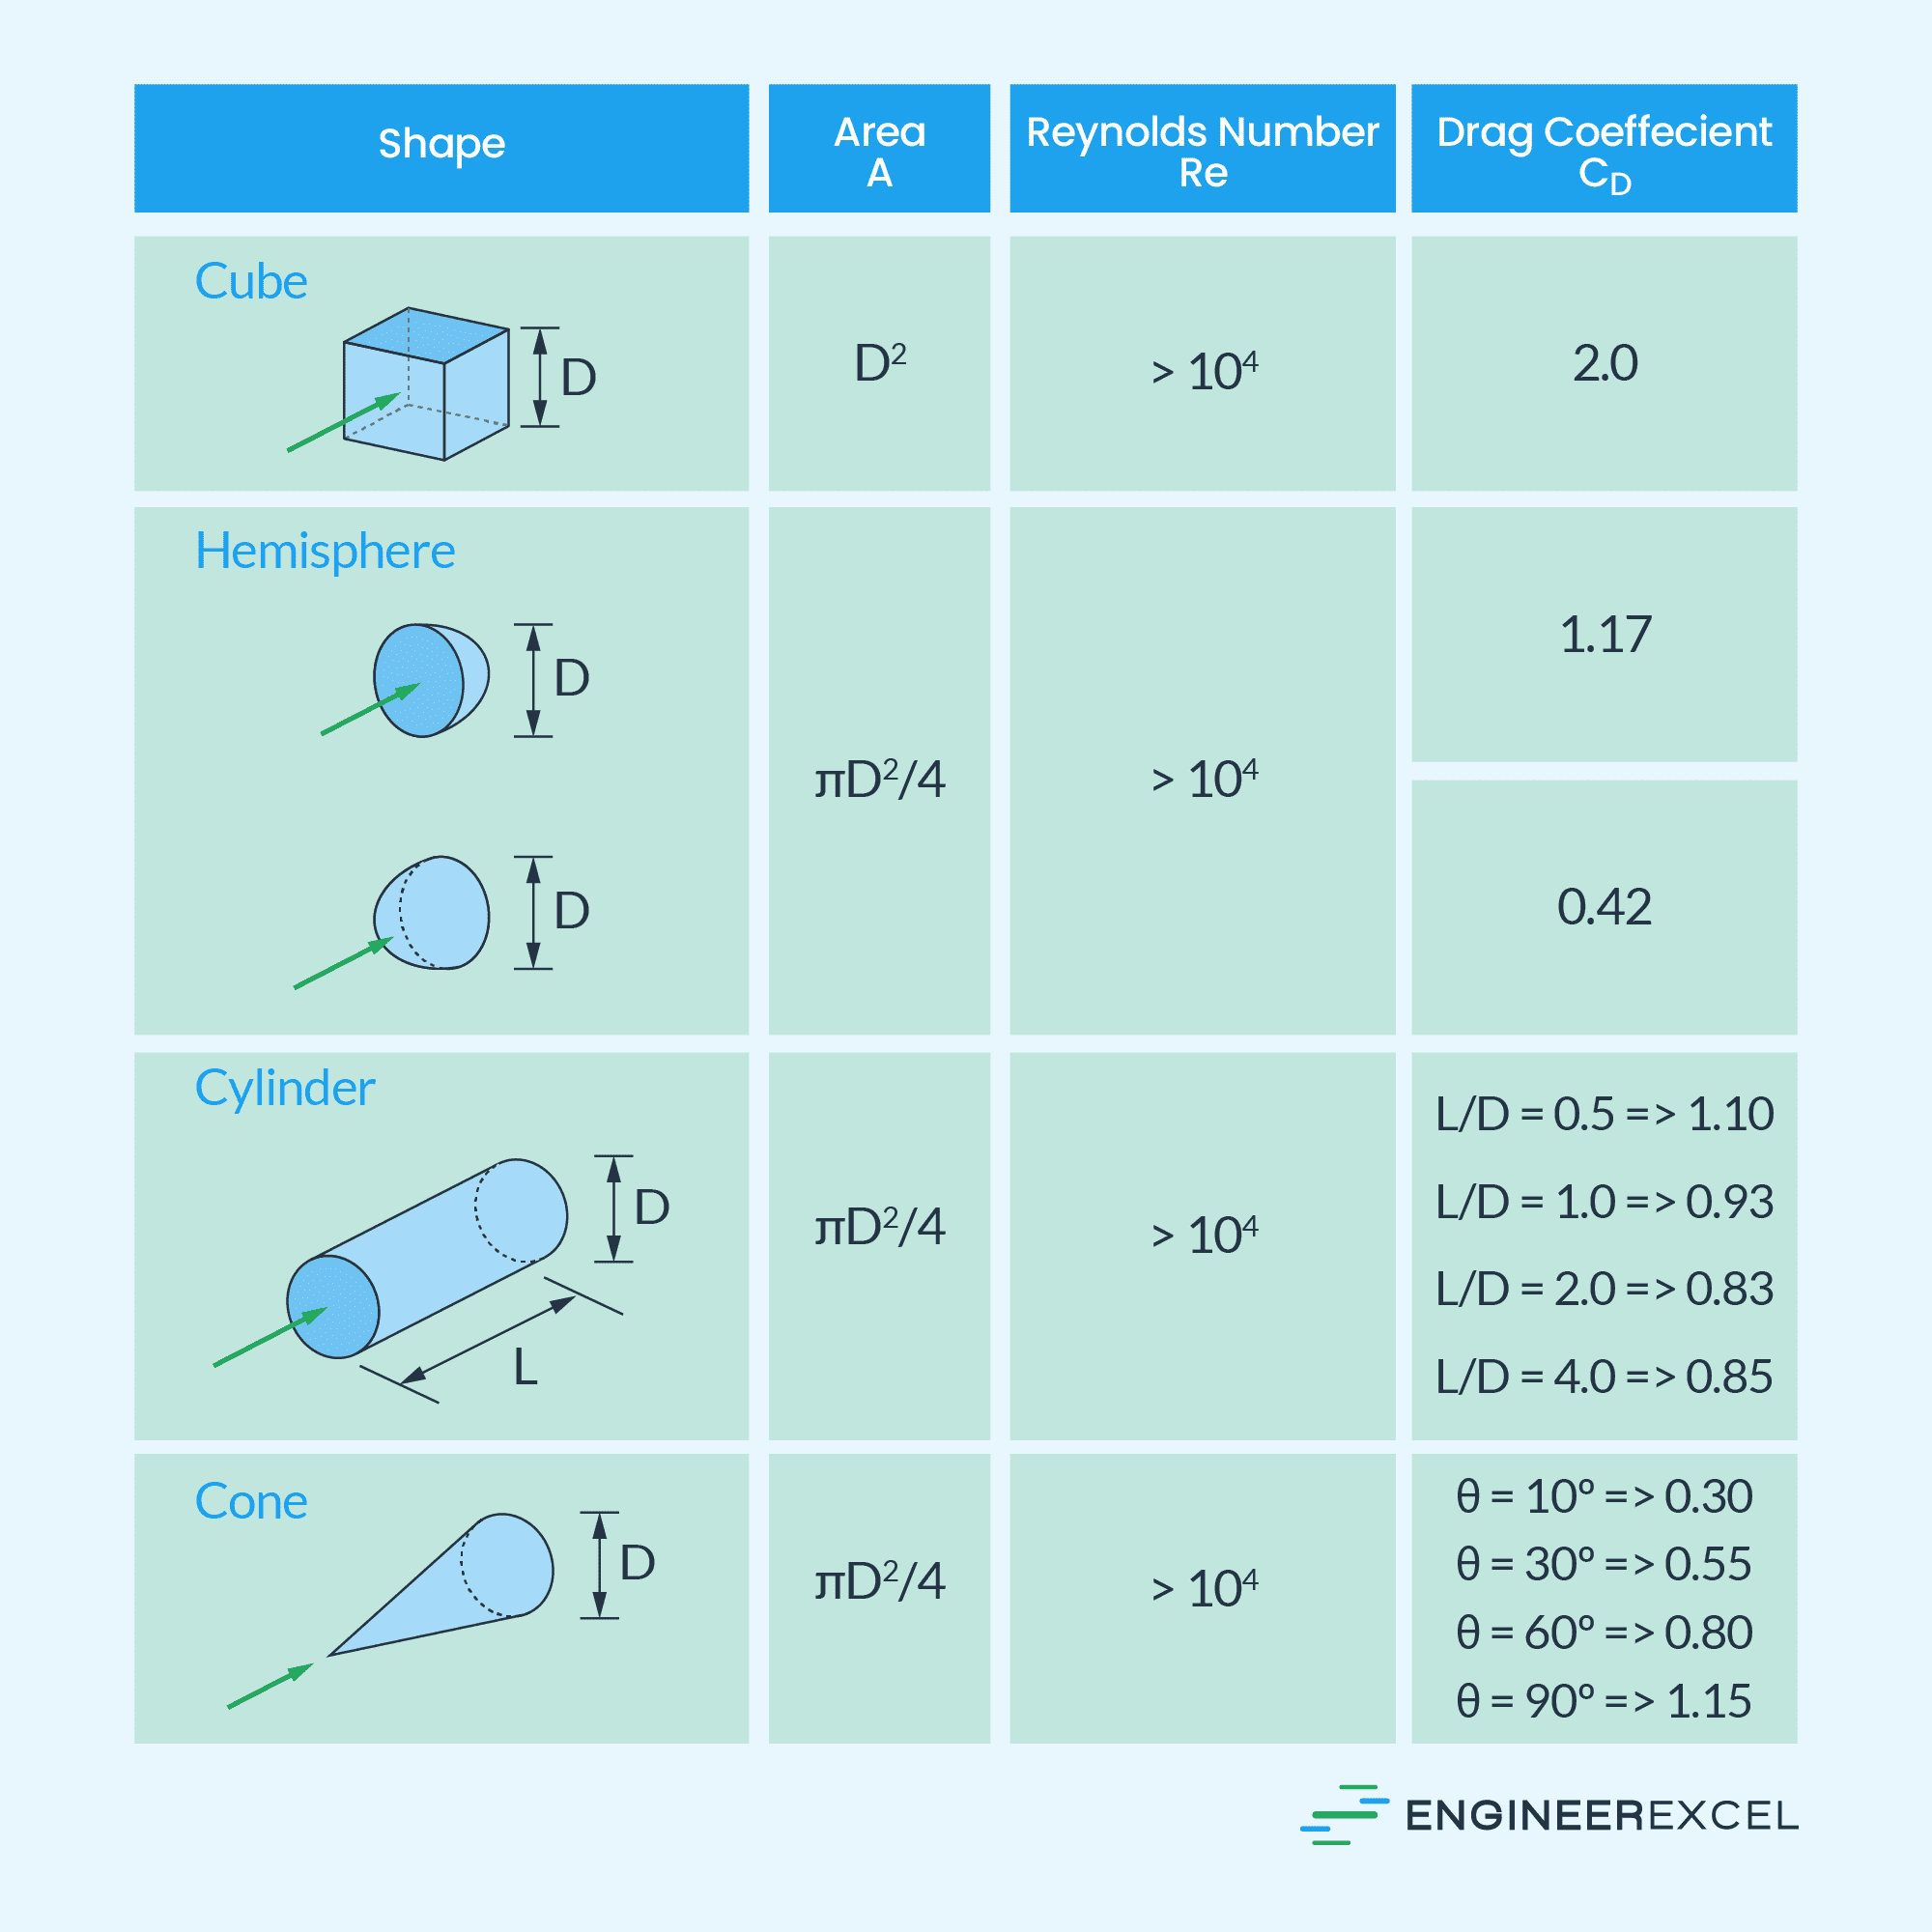 Estimated drag coefficient values for three-dimensional bodies